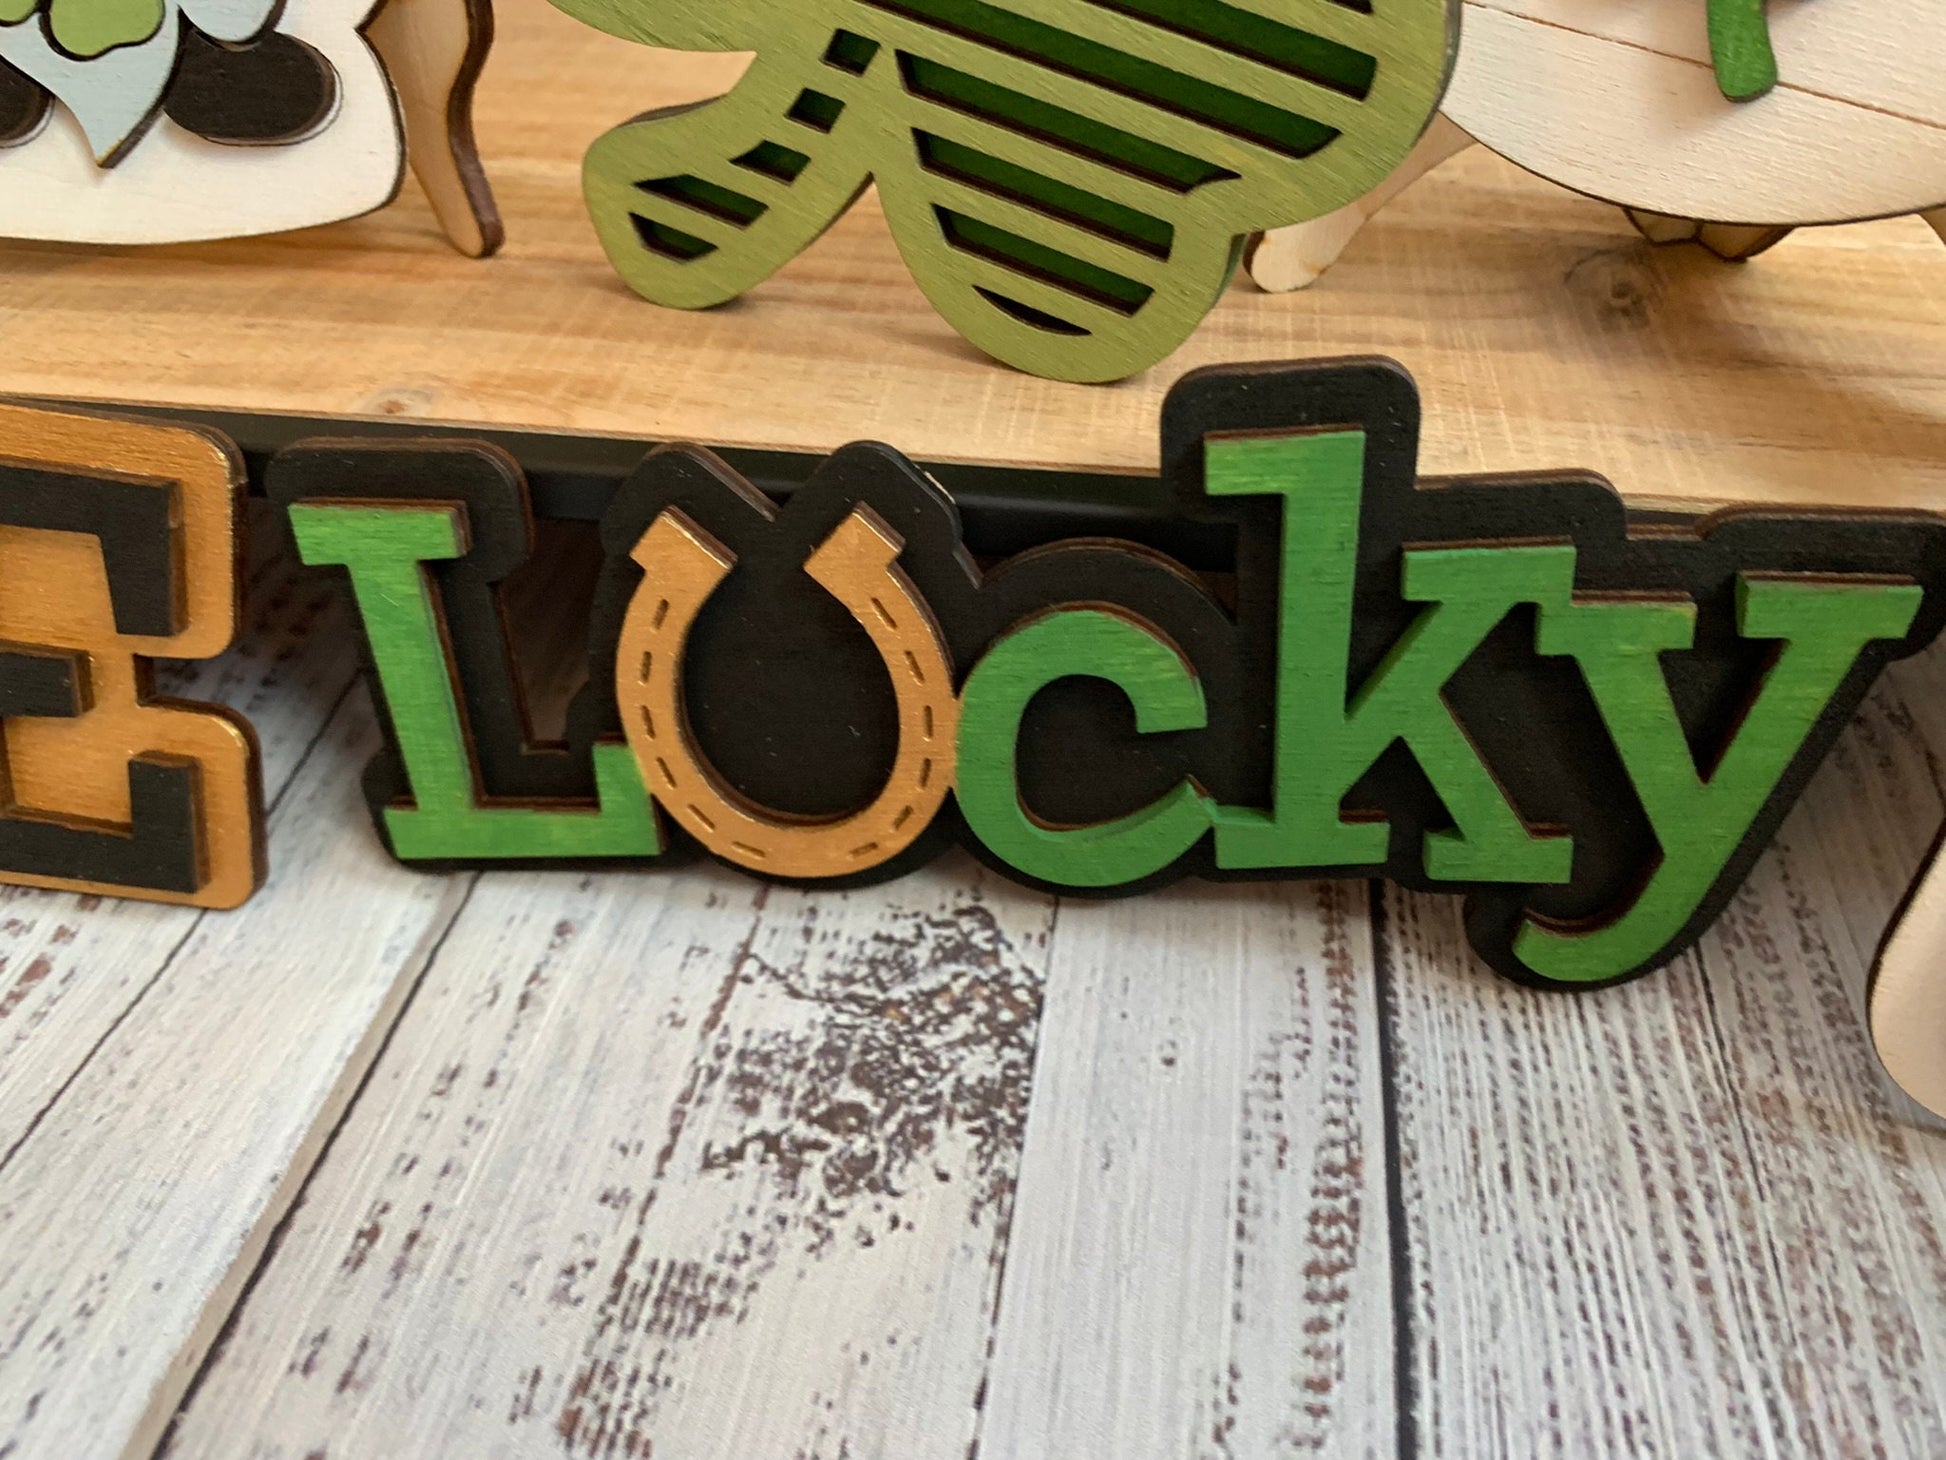 St. Patrick's Day Tiered Tray Decor - Laser Cut Wood Painted